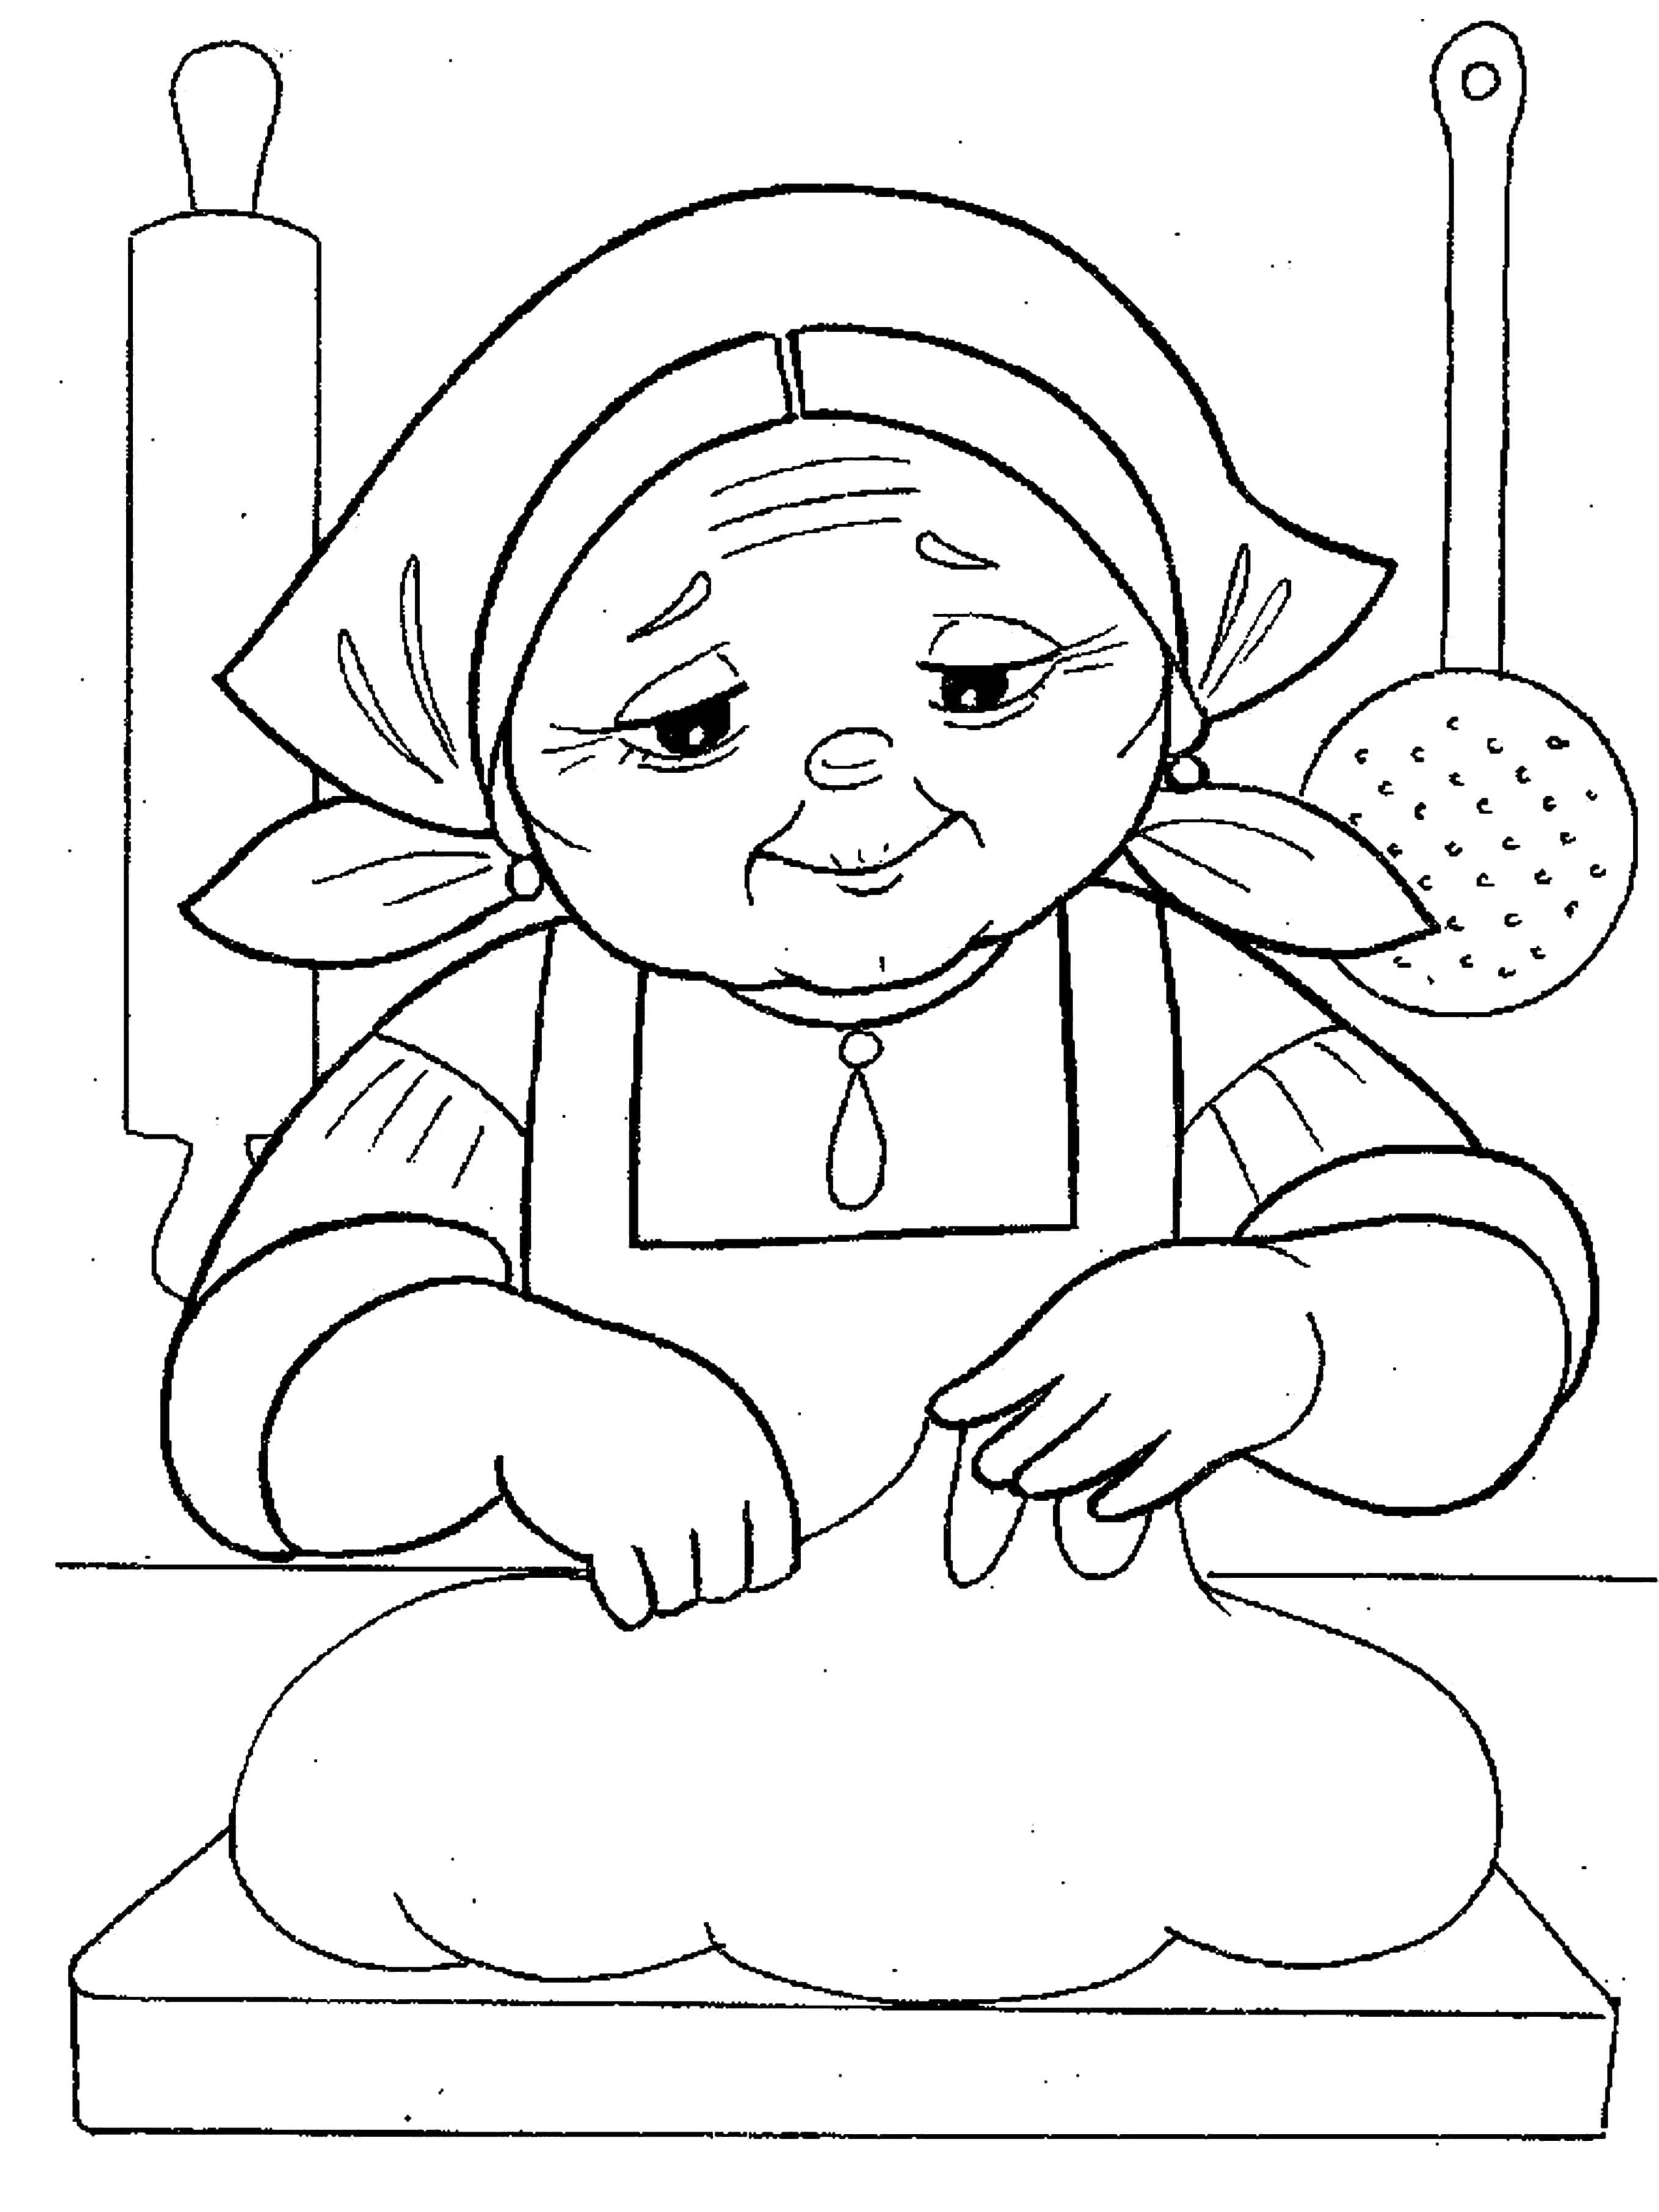 Coloring Grandma test. Category Fairy tales. Tags:  Fairy tales.